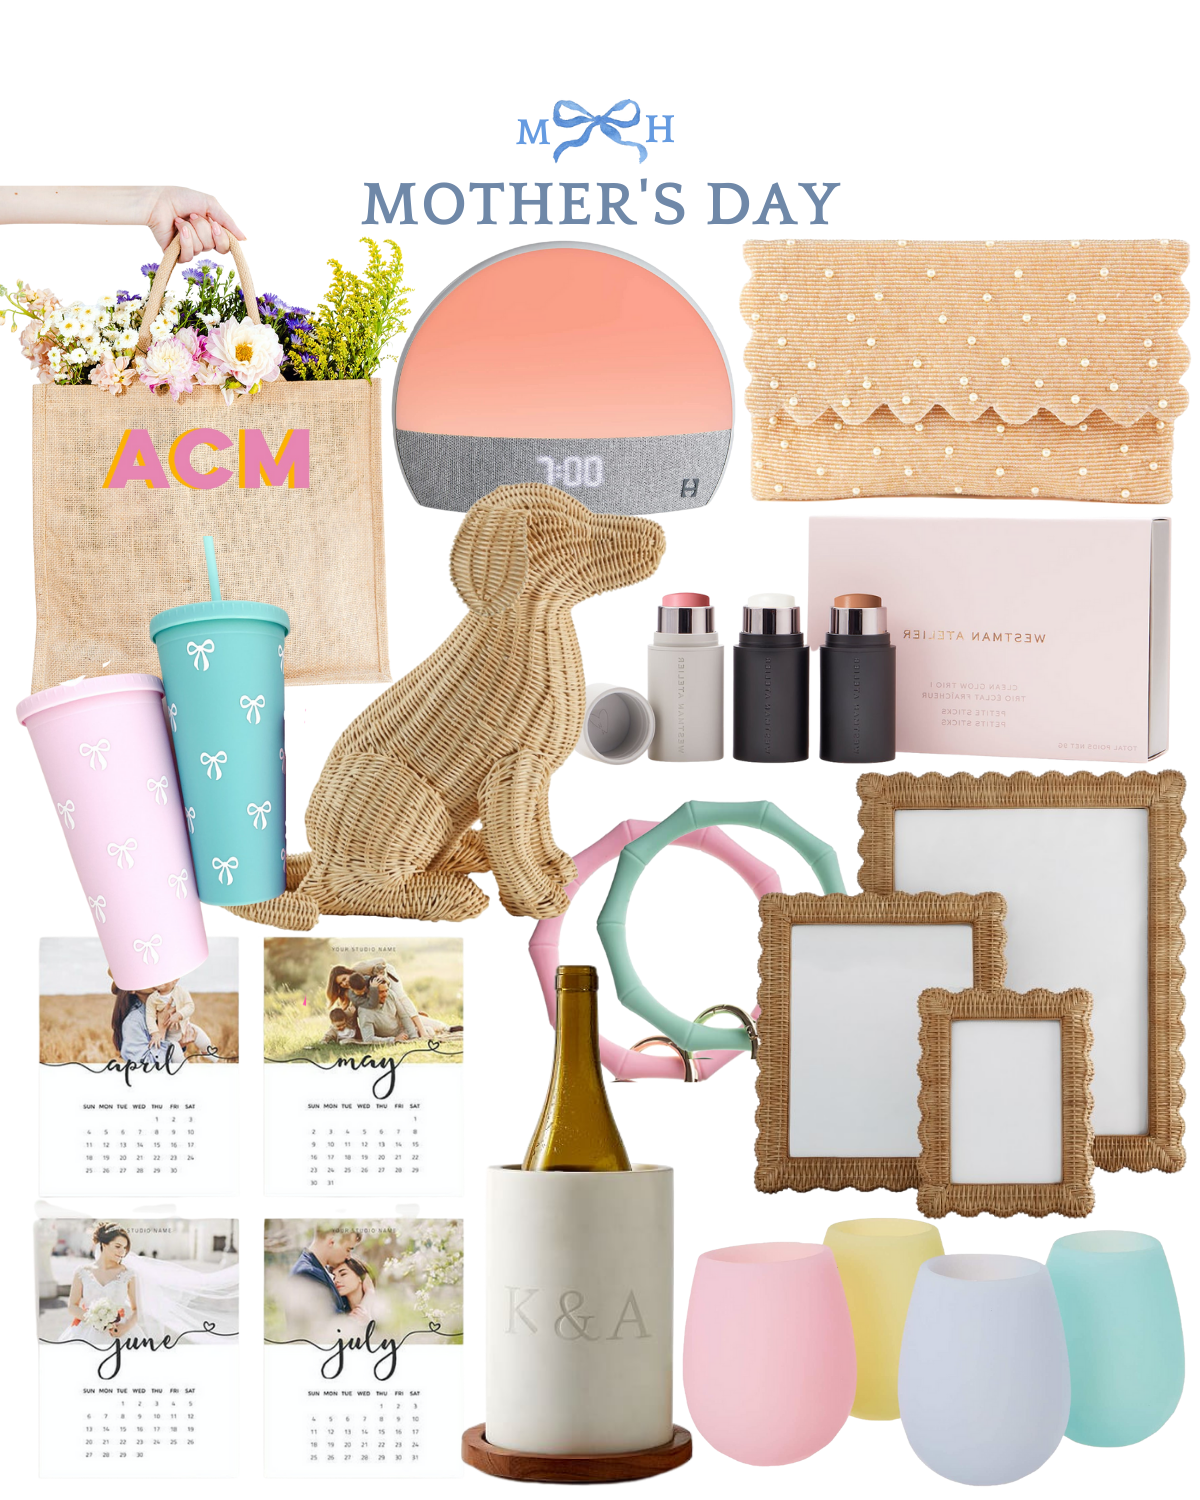 Mother's Day gifts for every type of mom, starting at $15